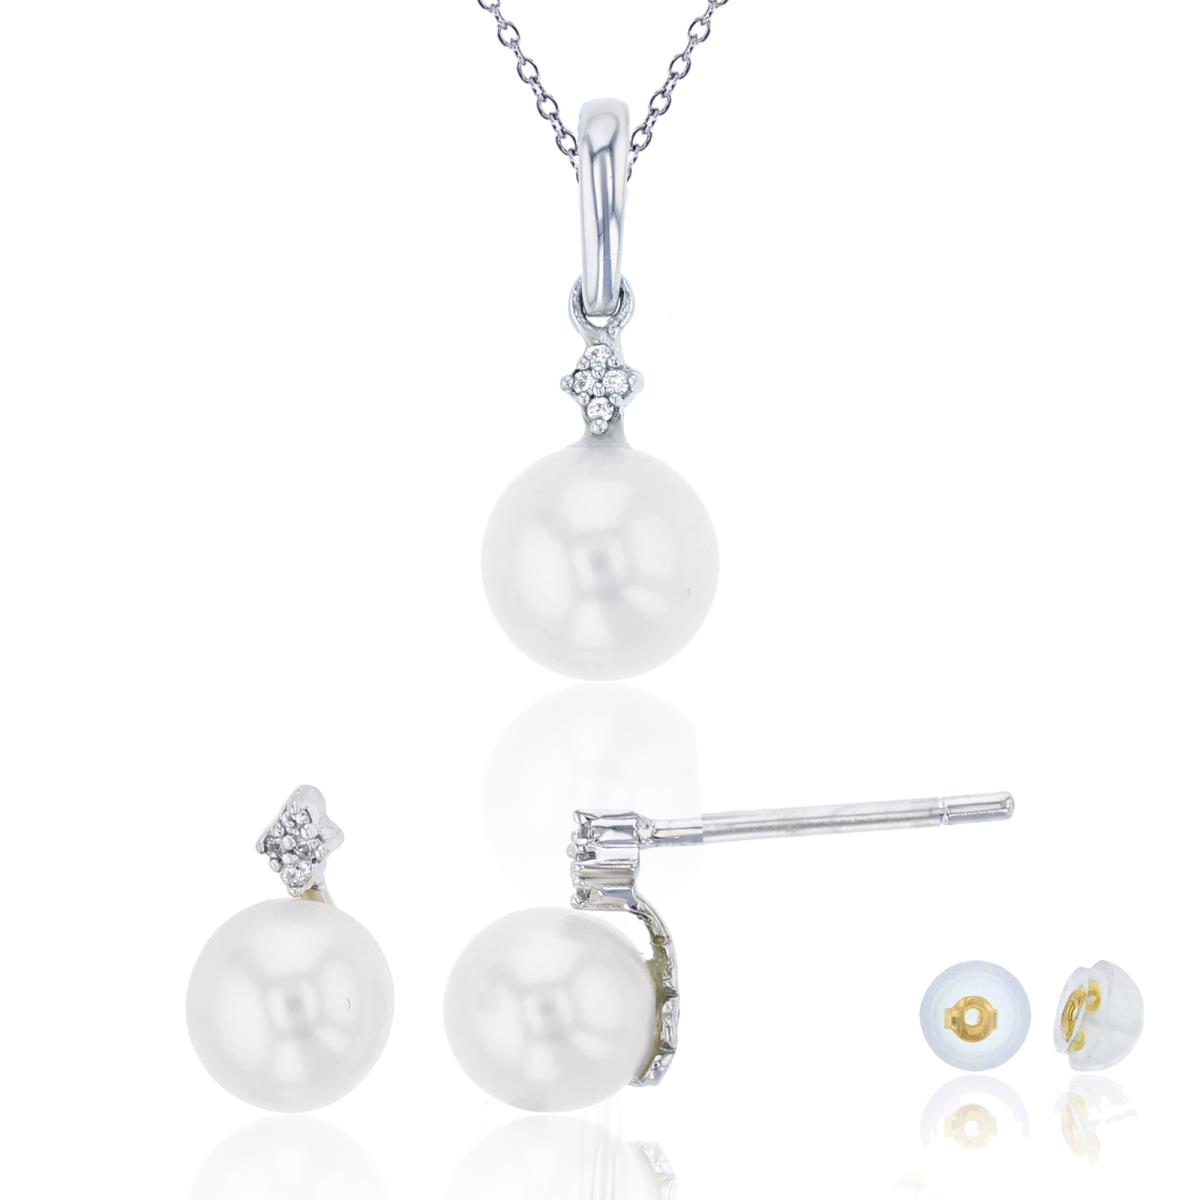 10K White Gold 0.03 CTTW Diamond & Rnd Pearl 18" Necklace/Earring Set with Silicon Backs